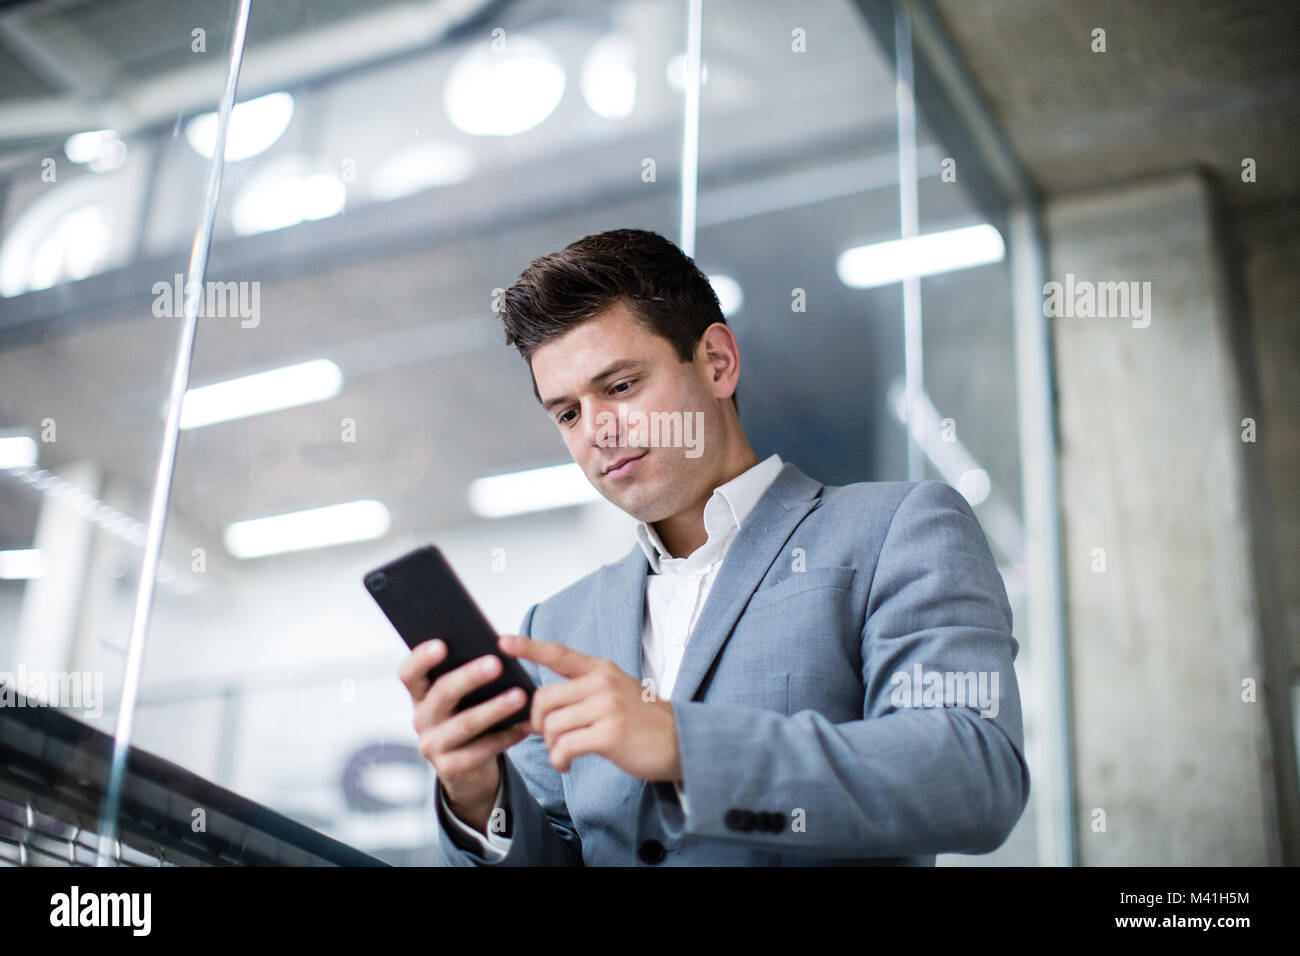 Businessman using smartphone in an office Stock Photo